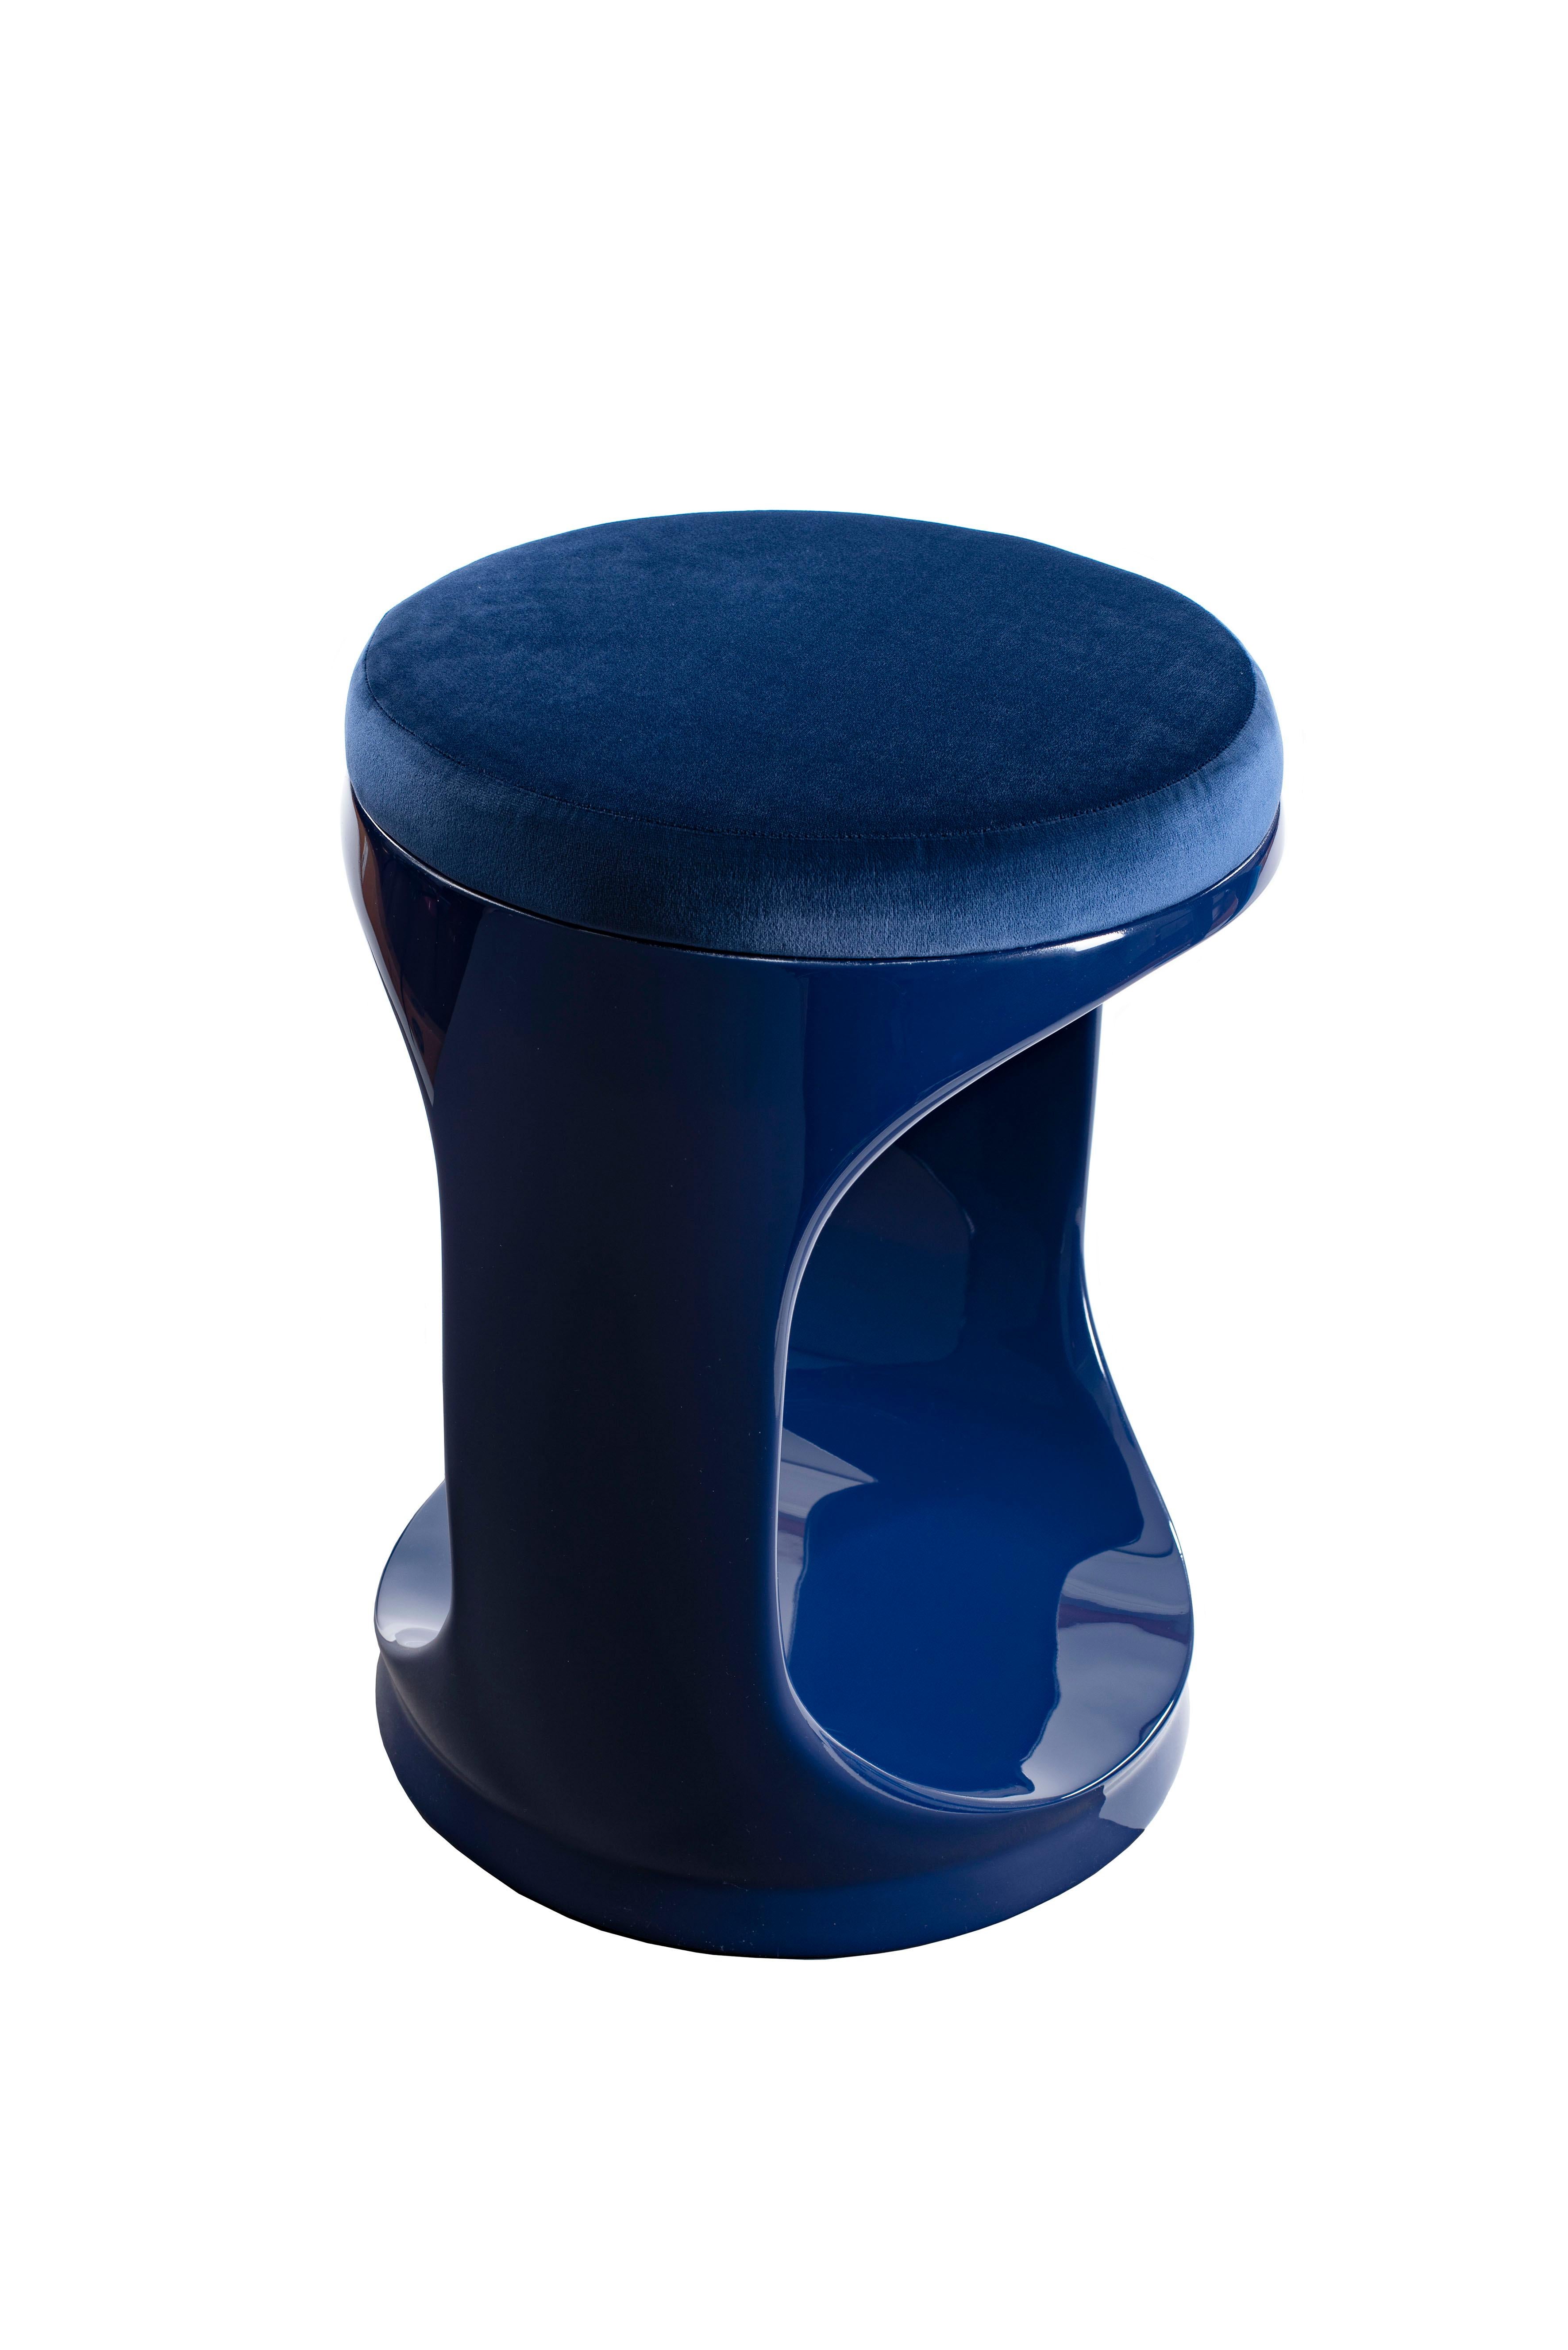 Contemporary Pouf by Cyril Rumpler Signet Ring, Hocker, Stool, navy blue.
These stools are available in a dozen colors and in a glossy finish. The black, white, navy blue, pink, red, turquoise, lilac, brown, green, and grey stools are available with